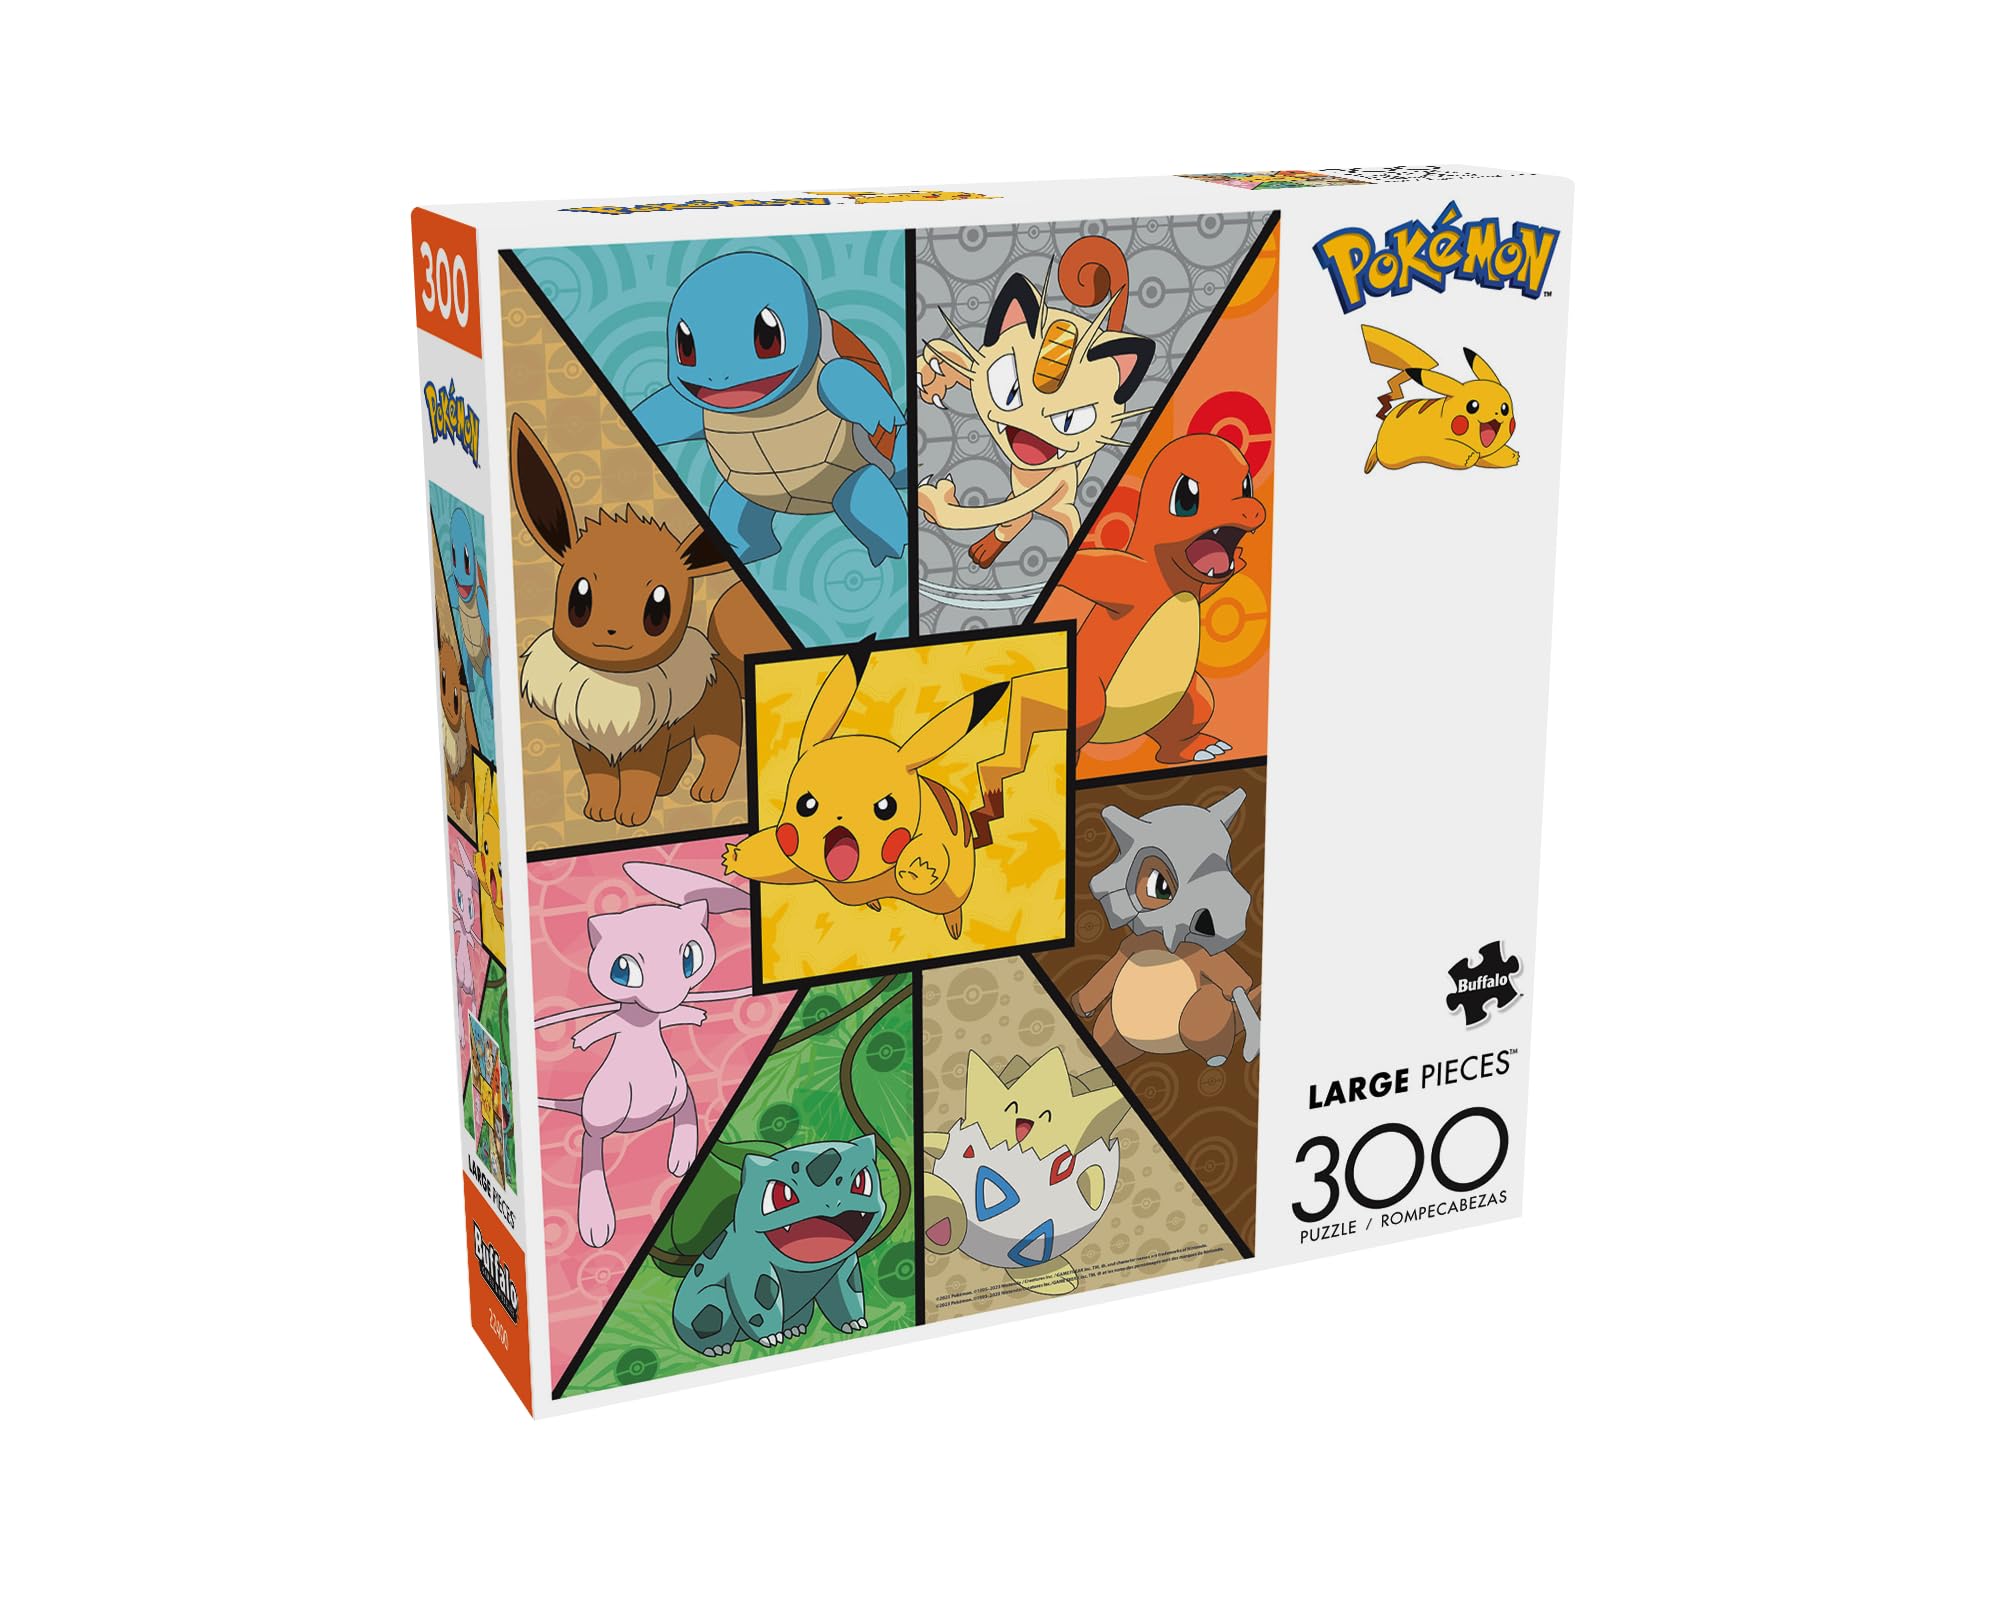 Buffalo Games - Pokemon - Kanto Companions - 300 Large Piece Jigsaw Puzzle for Adults Challenging Puzzle Perfect for Game Nights - Finished Size 21.25 x 15.00